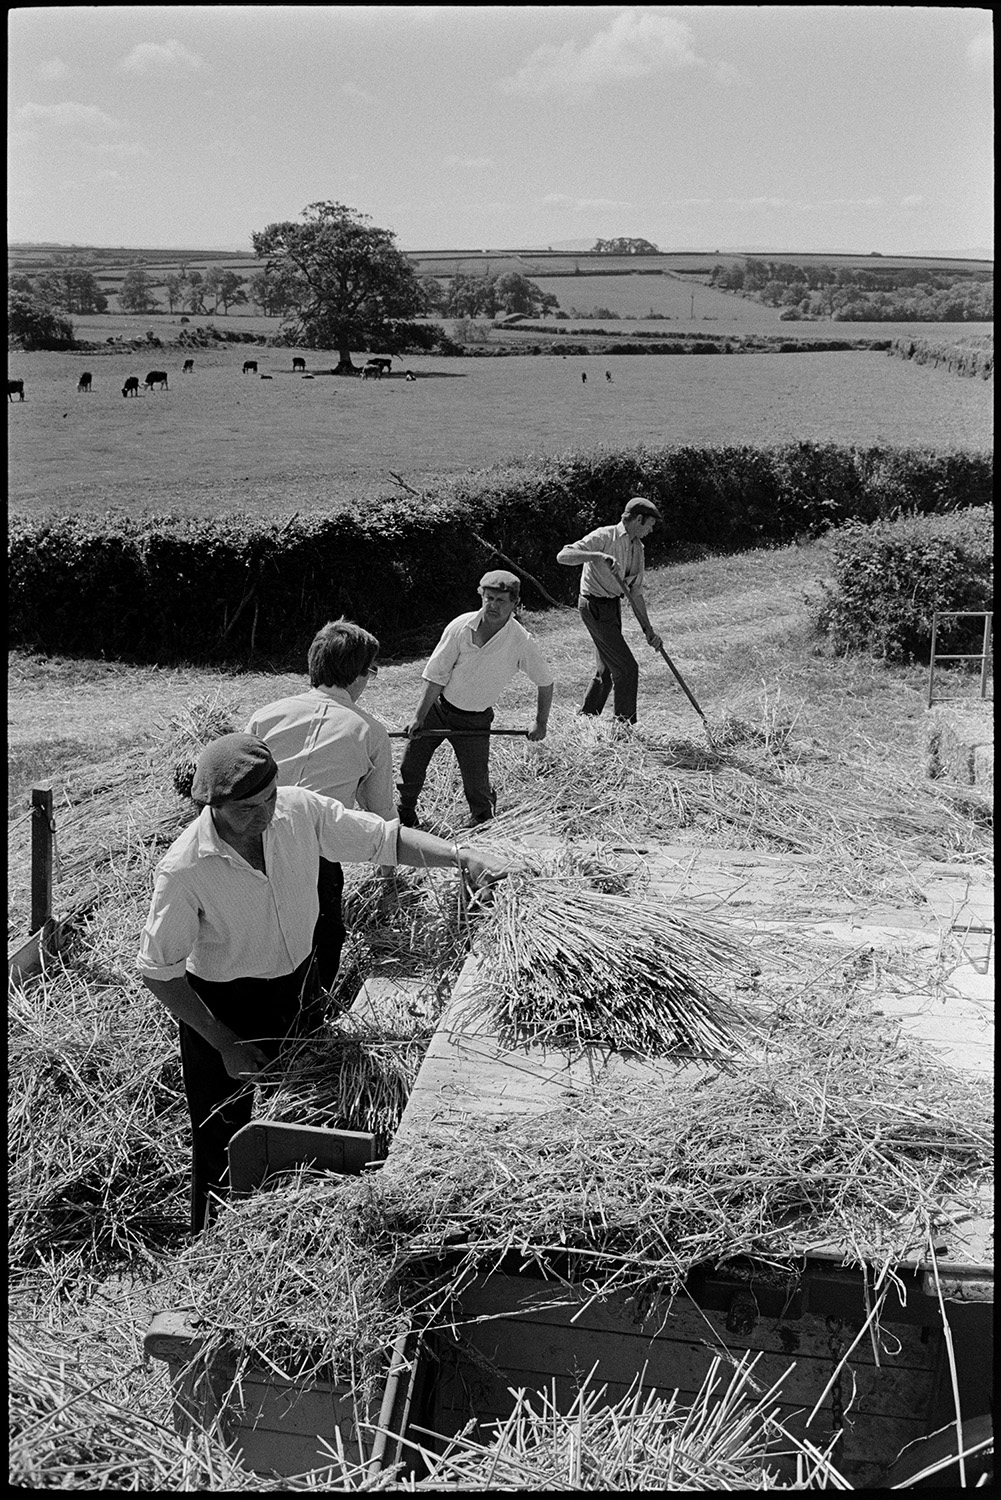 Reedcombing, men feeding wheat sheaves into machine from rick.
[Four men feeding wheat sheaves from a rick into a reed comber machine to produce nitches or bundles of reeds for use in thatching. The work is taking place in a field at Westacott, Riddlecombe, in bright sunlight. Fields containing grazing cows are visible in the background.]